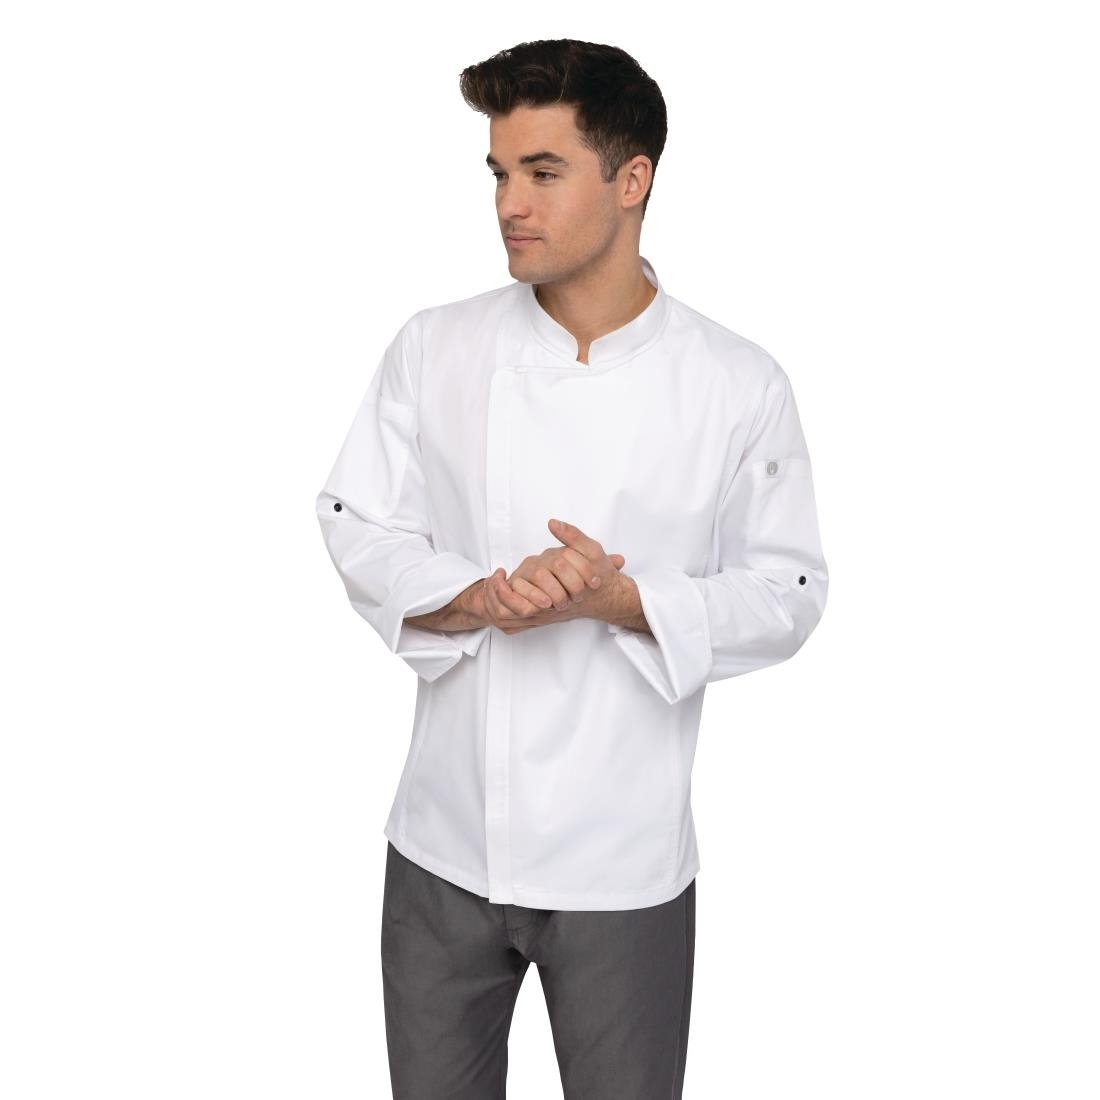 BB264-S Chef Works Unisex Hartford Lightweight Chef Jacket White Size S JD Catering Equipment Solutions Ltd